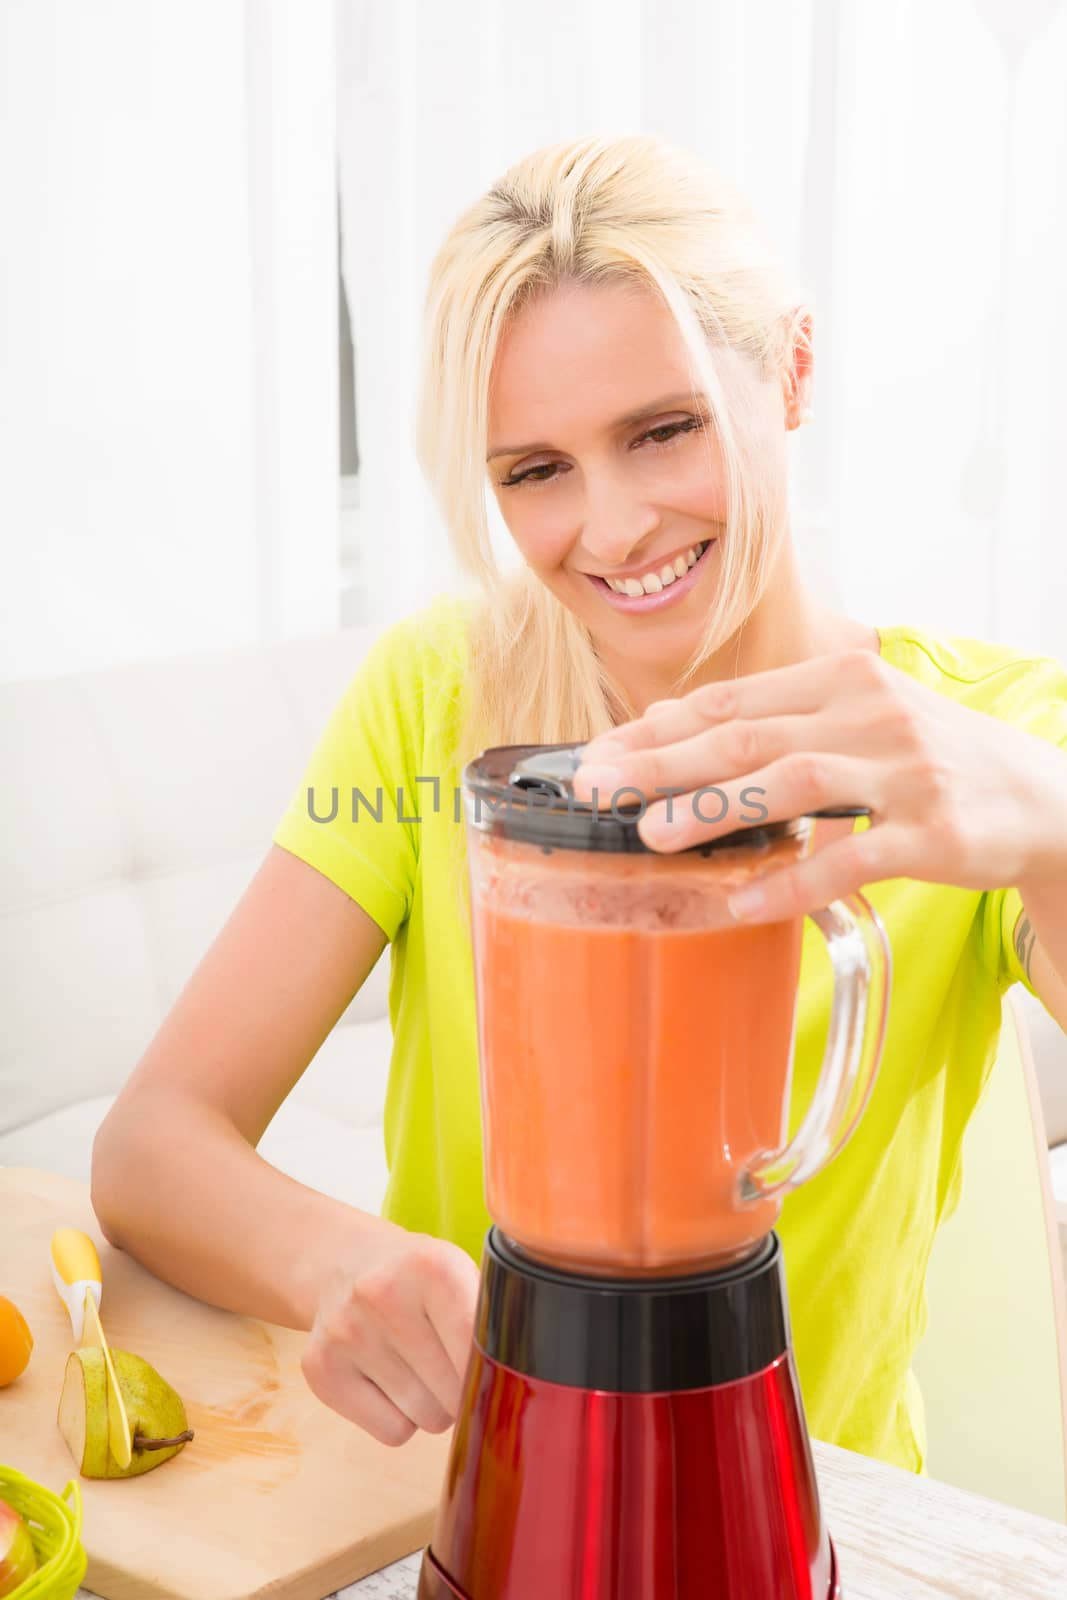 Mature woman blending a smoothie					 by Spectral